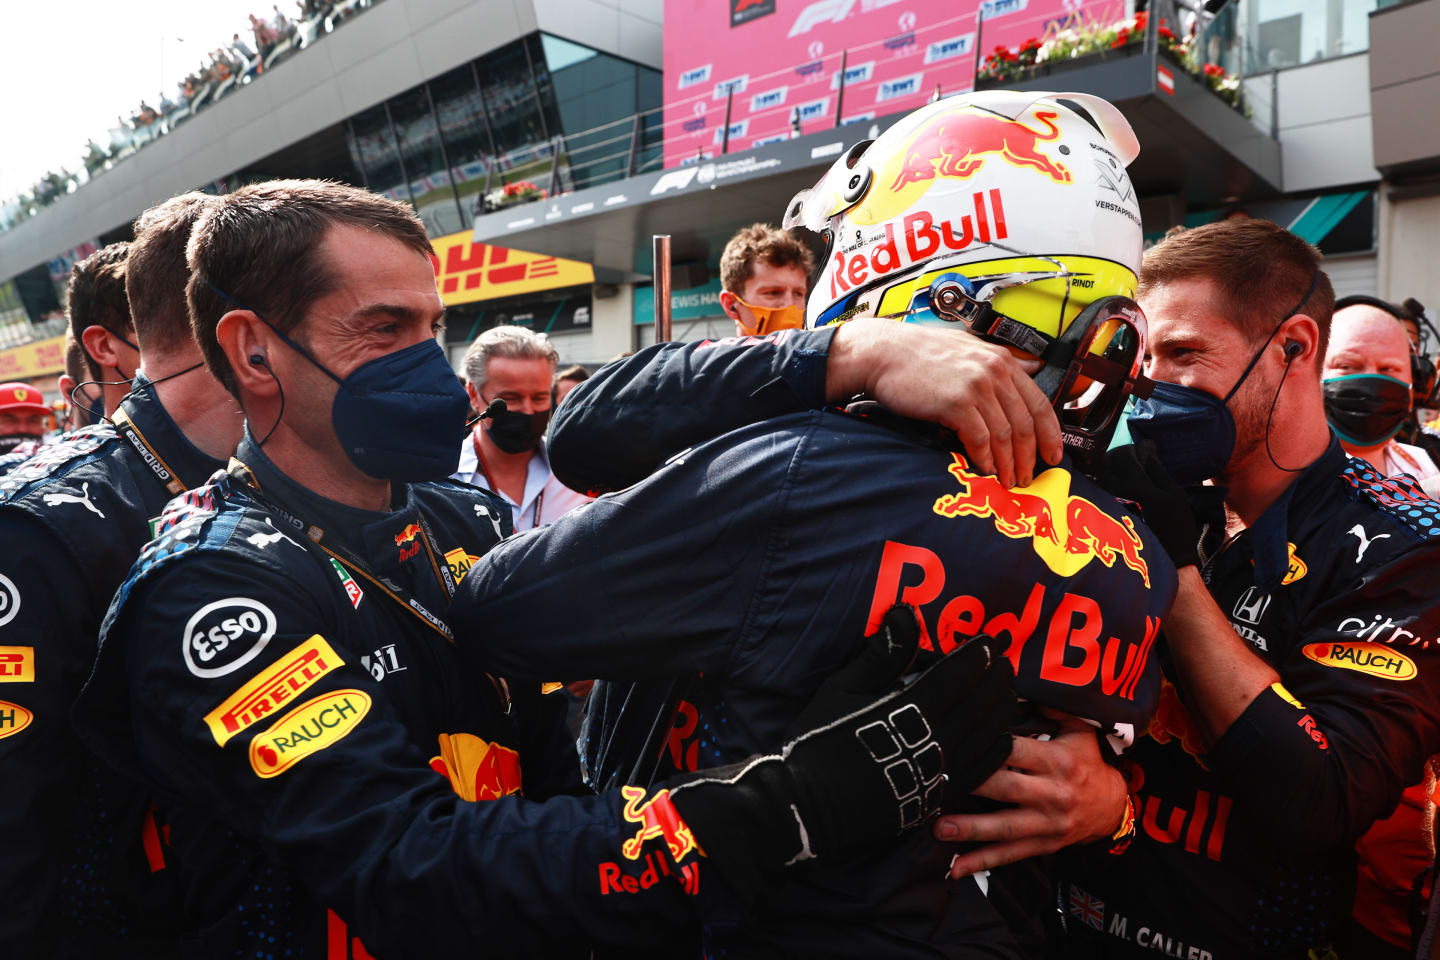 SPIELBERG, AUSTRIA - JULY 04: Race winner Max Verstappen of Netherlands and Red Bull Racing celebrates in parc ferme during the F1 Grand Prix of Austria at Red Bull Ring on July 04, 2021 in Spielberg, Austria. (Photo by Mark Thompson/Getty Images)